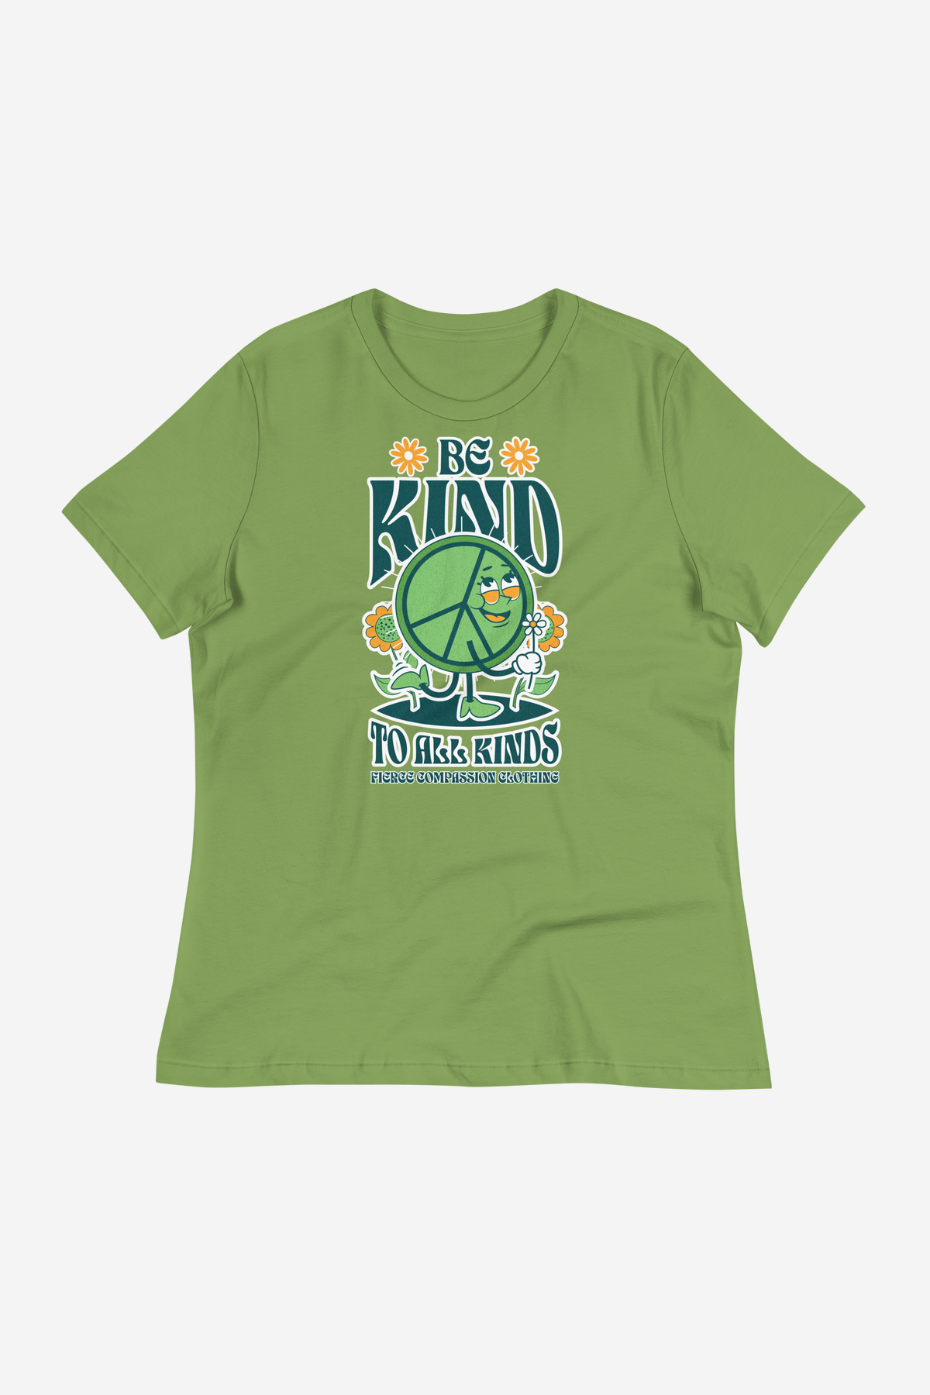 Kind To All Kinds Women's Relaxed T-Shirt